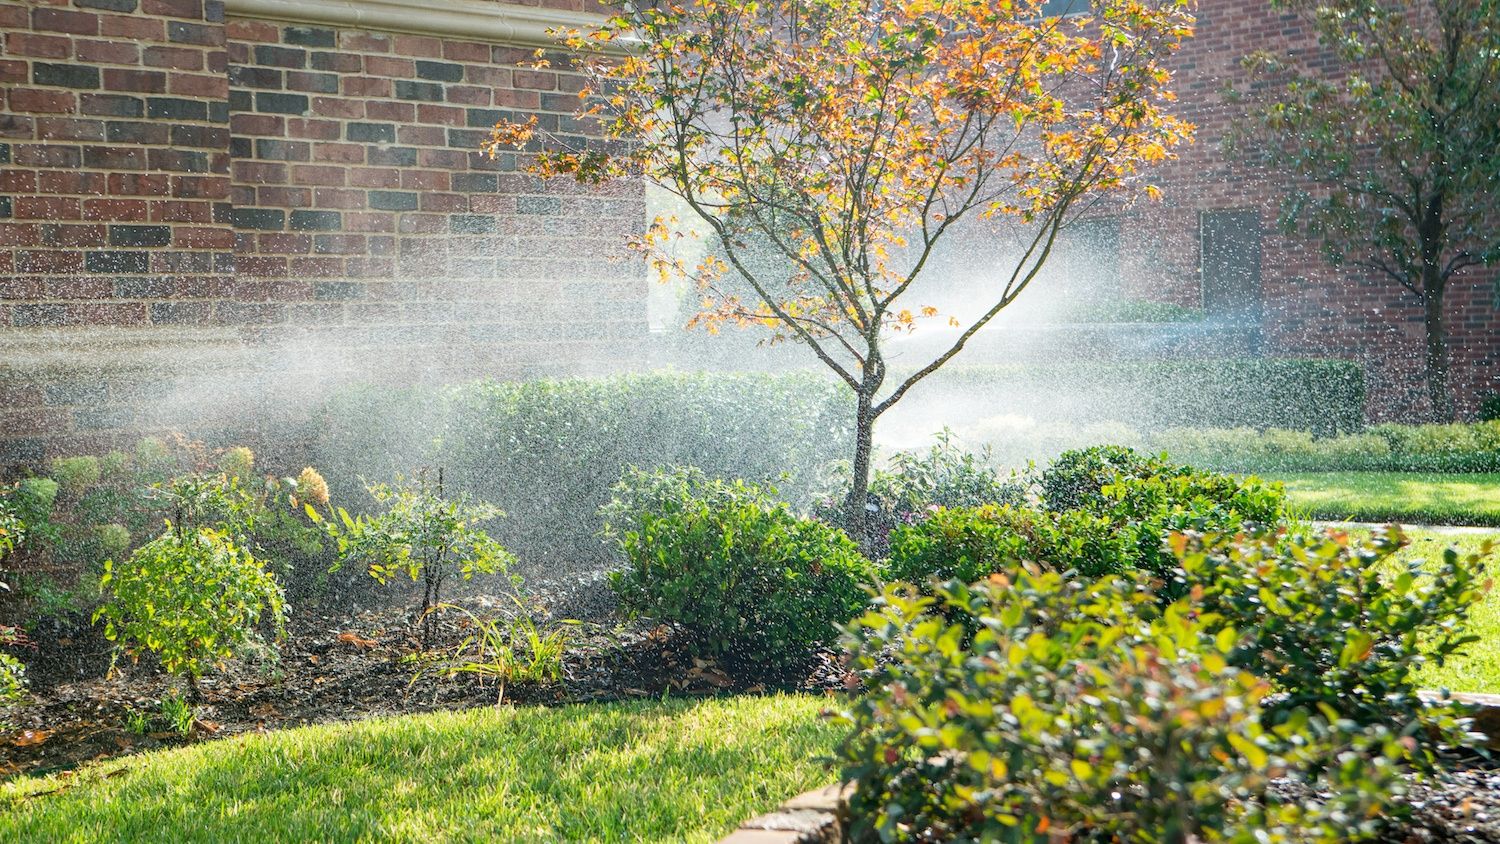 6 Lawn Irrigation System Problems You Might Not Notice